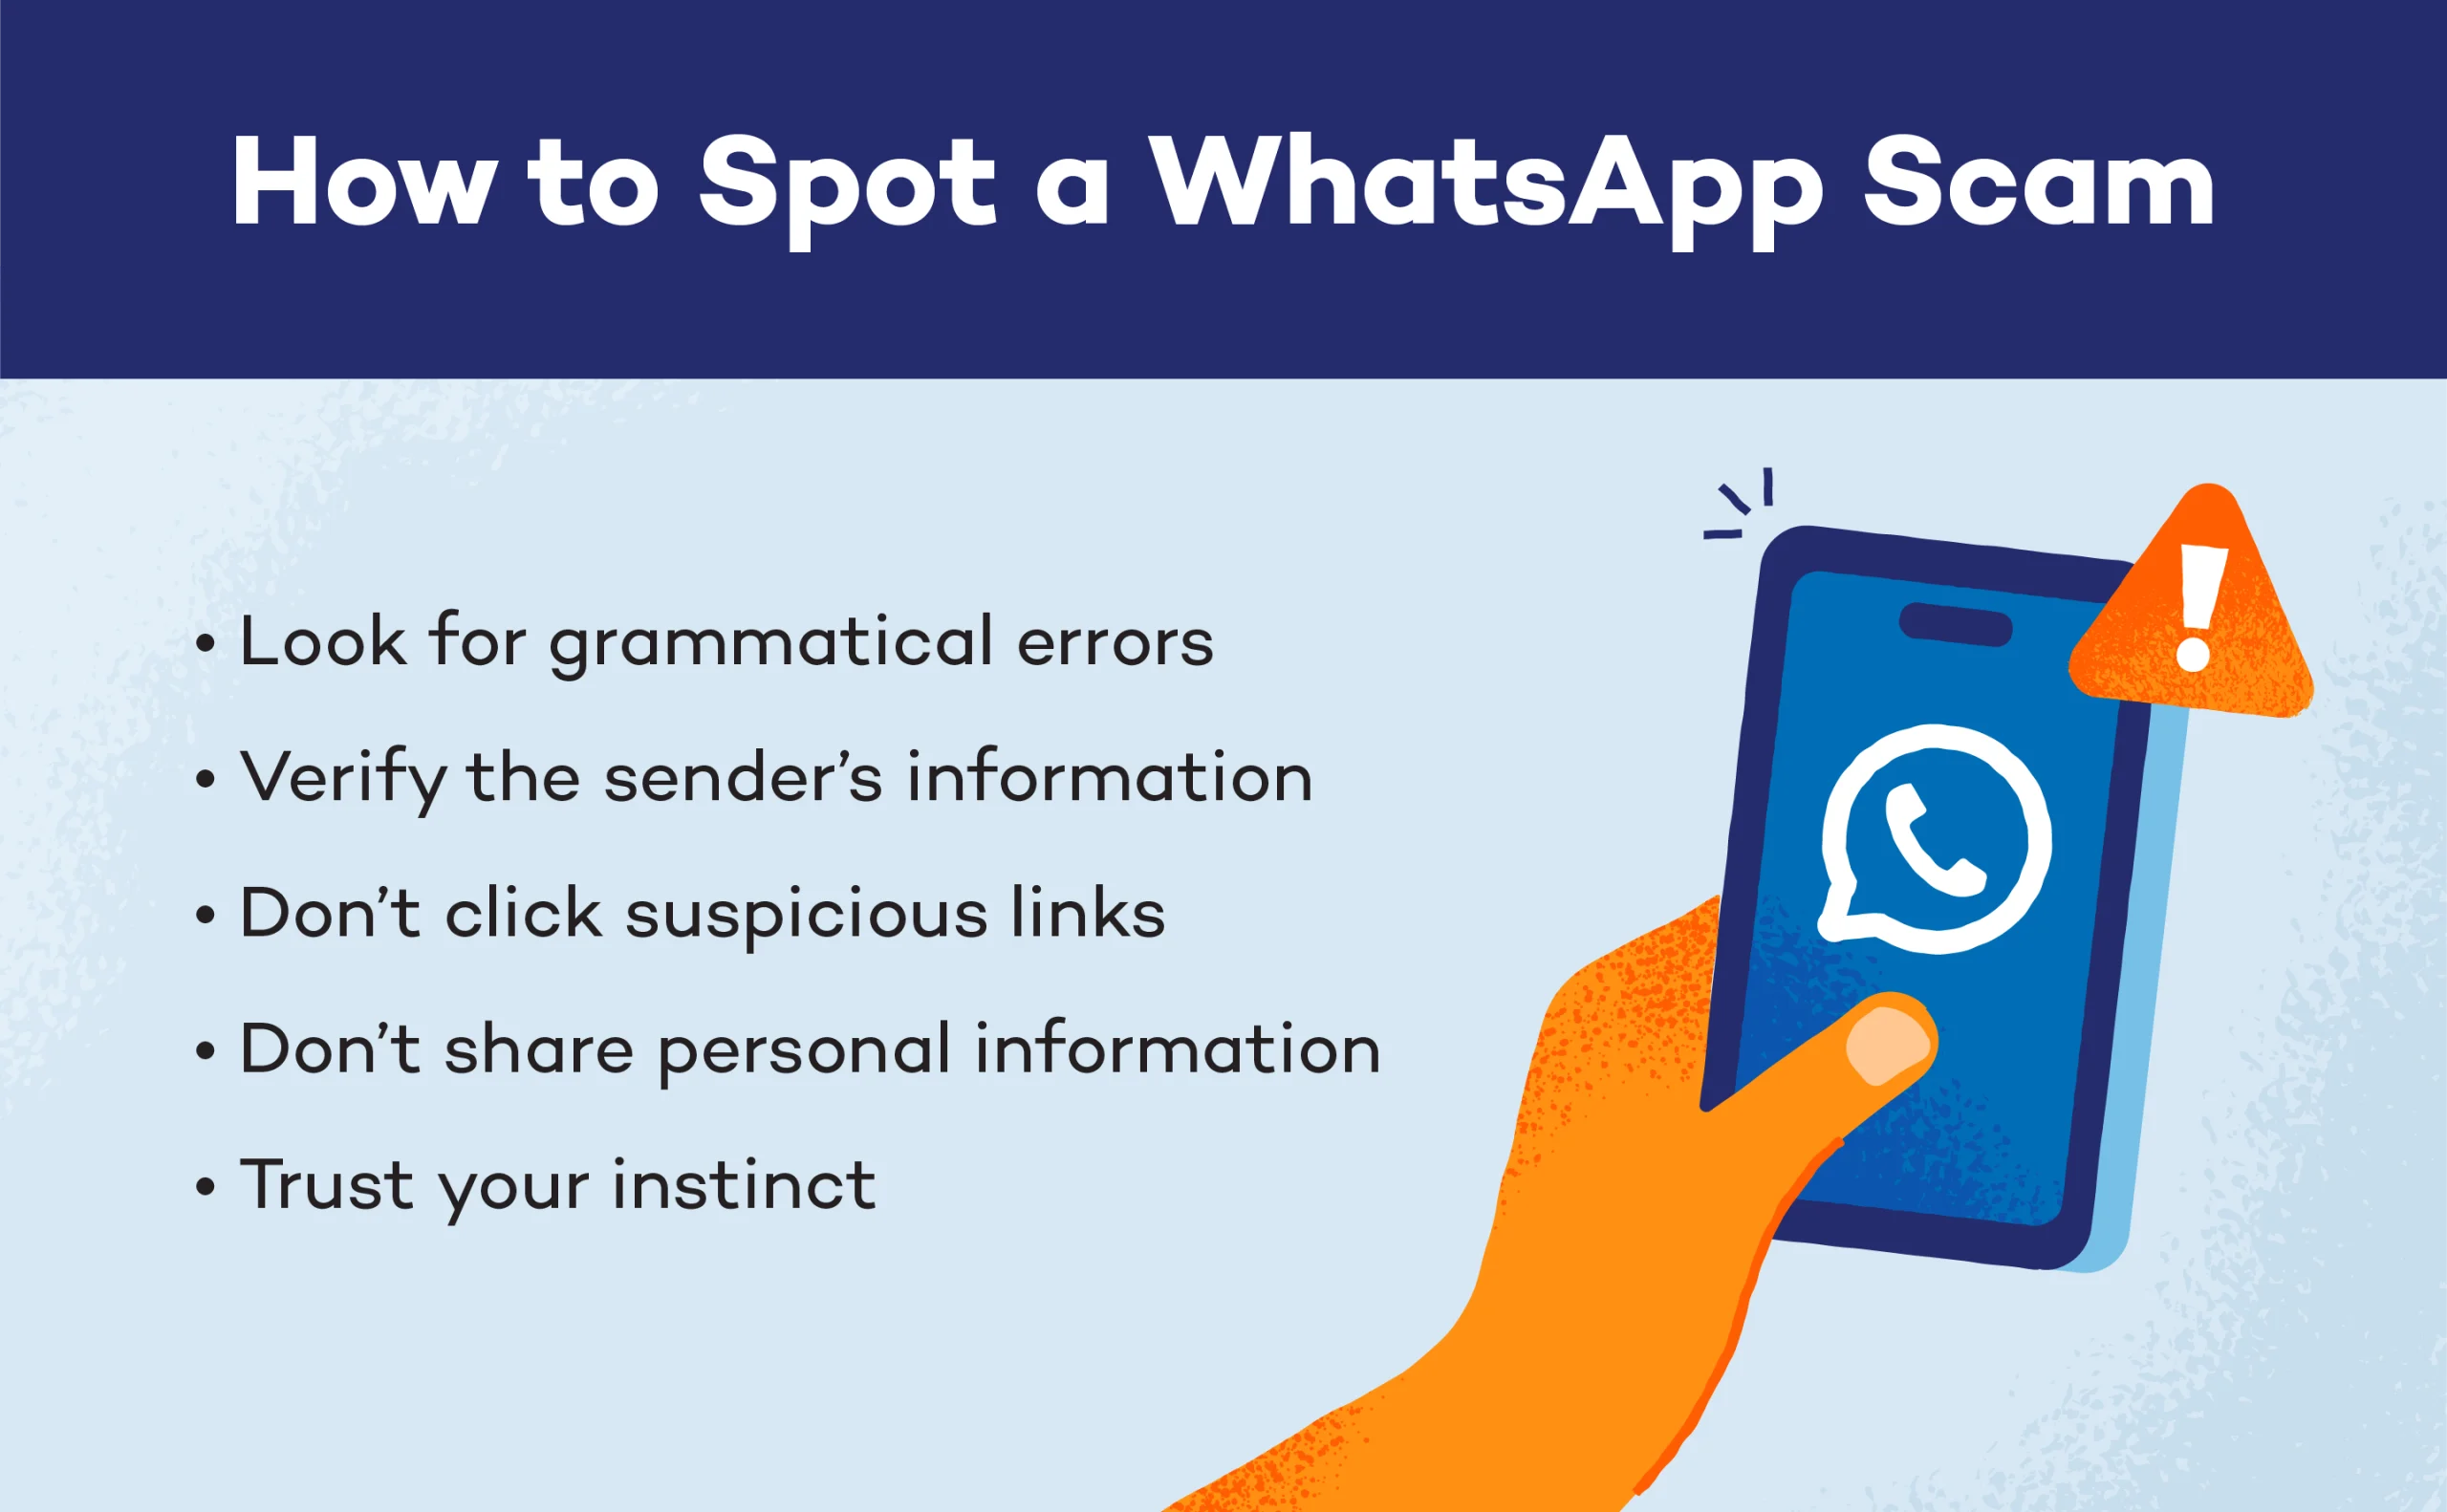 Illustration showing tips on how to spot a WhatsApp scam